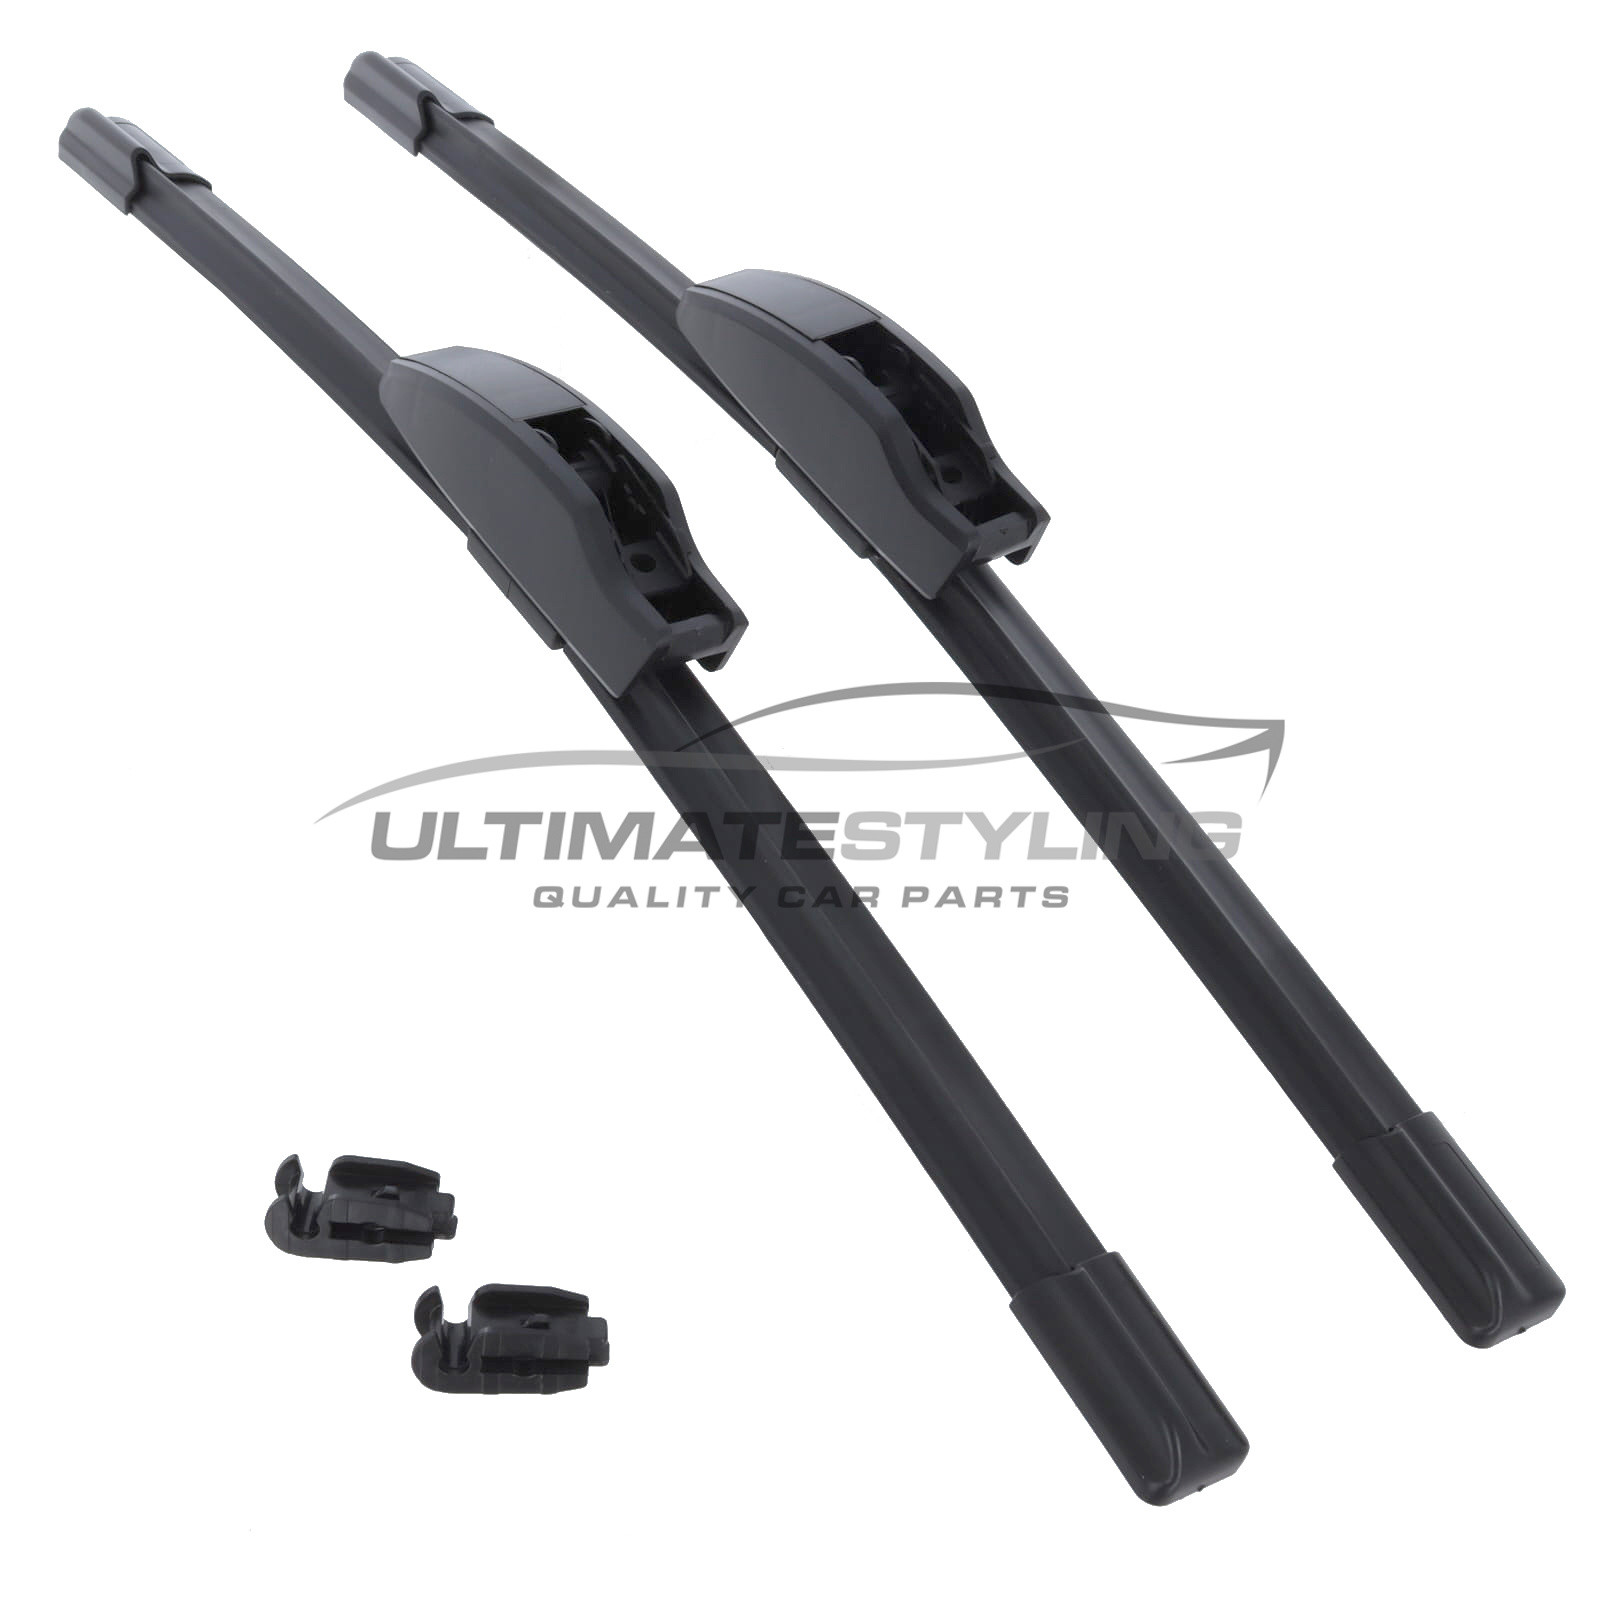 Drivers Side & Passenger Side (Front) Wiper Blades for Reliant Rialto